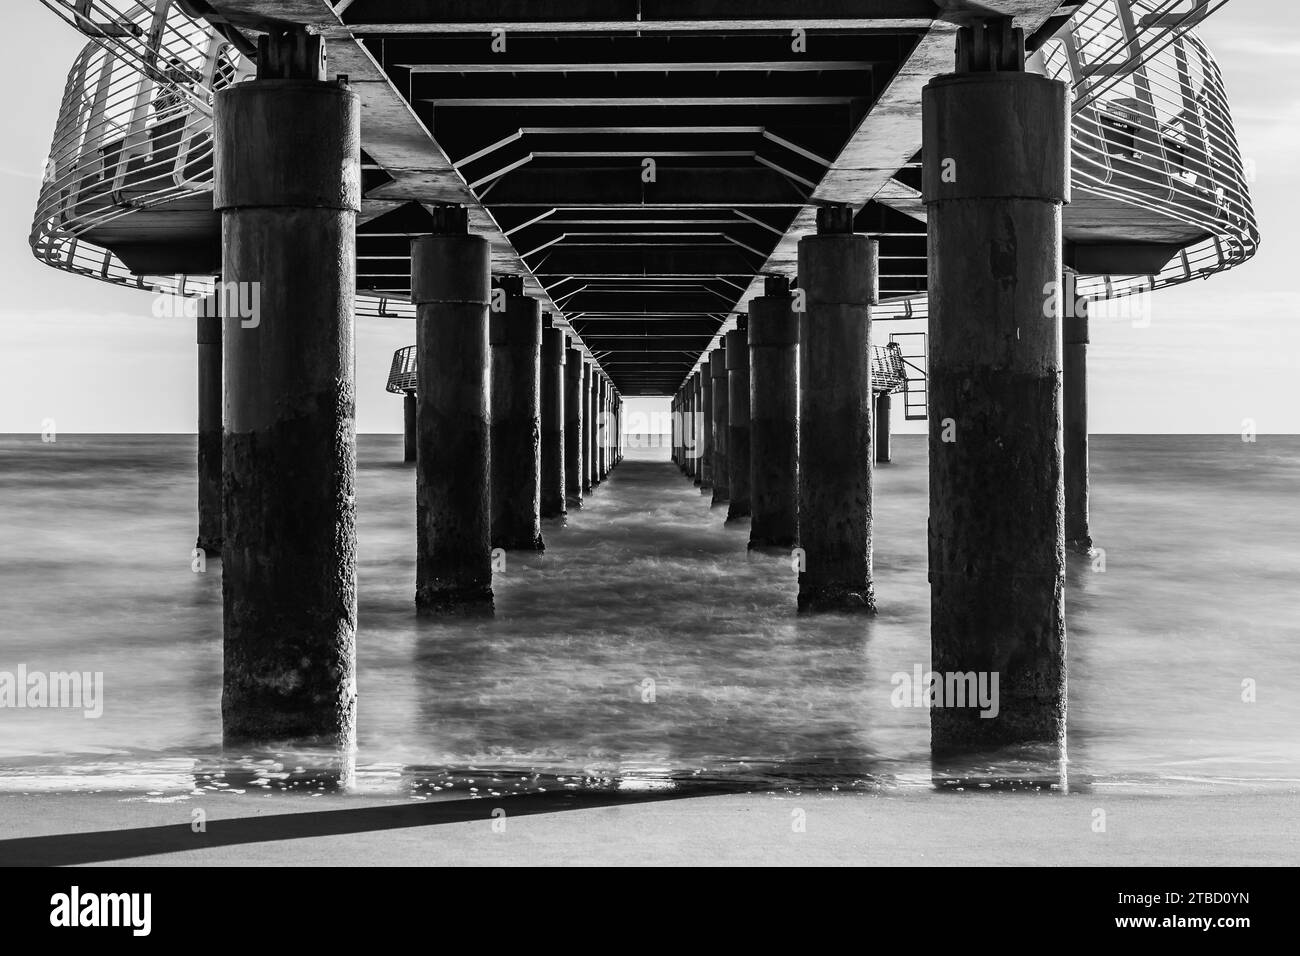 Symmetry at the pier Stock Photo